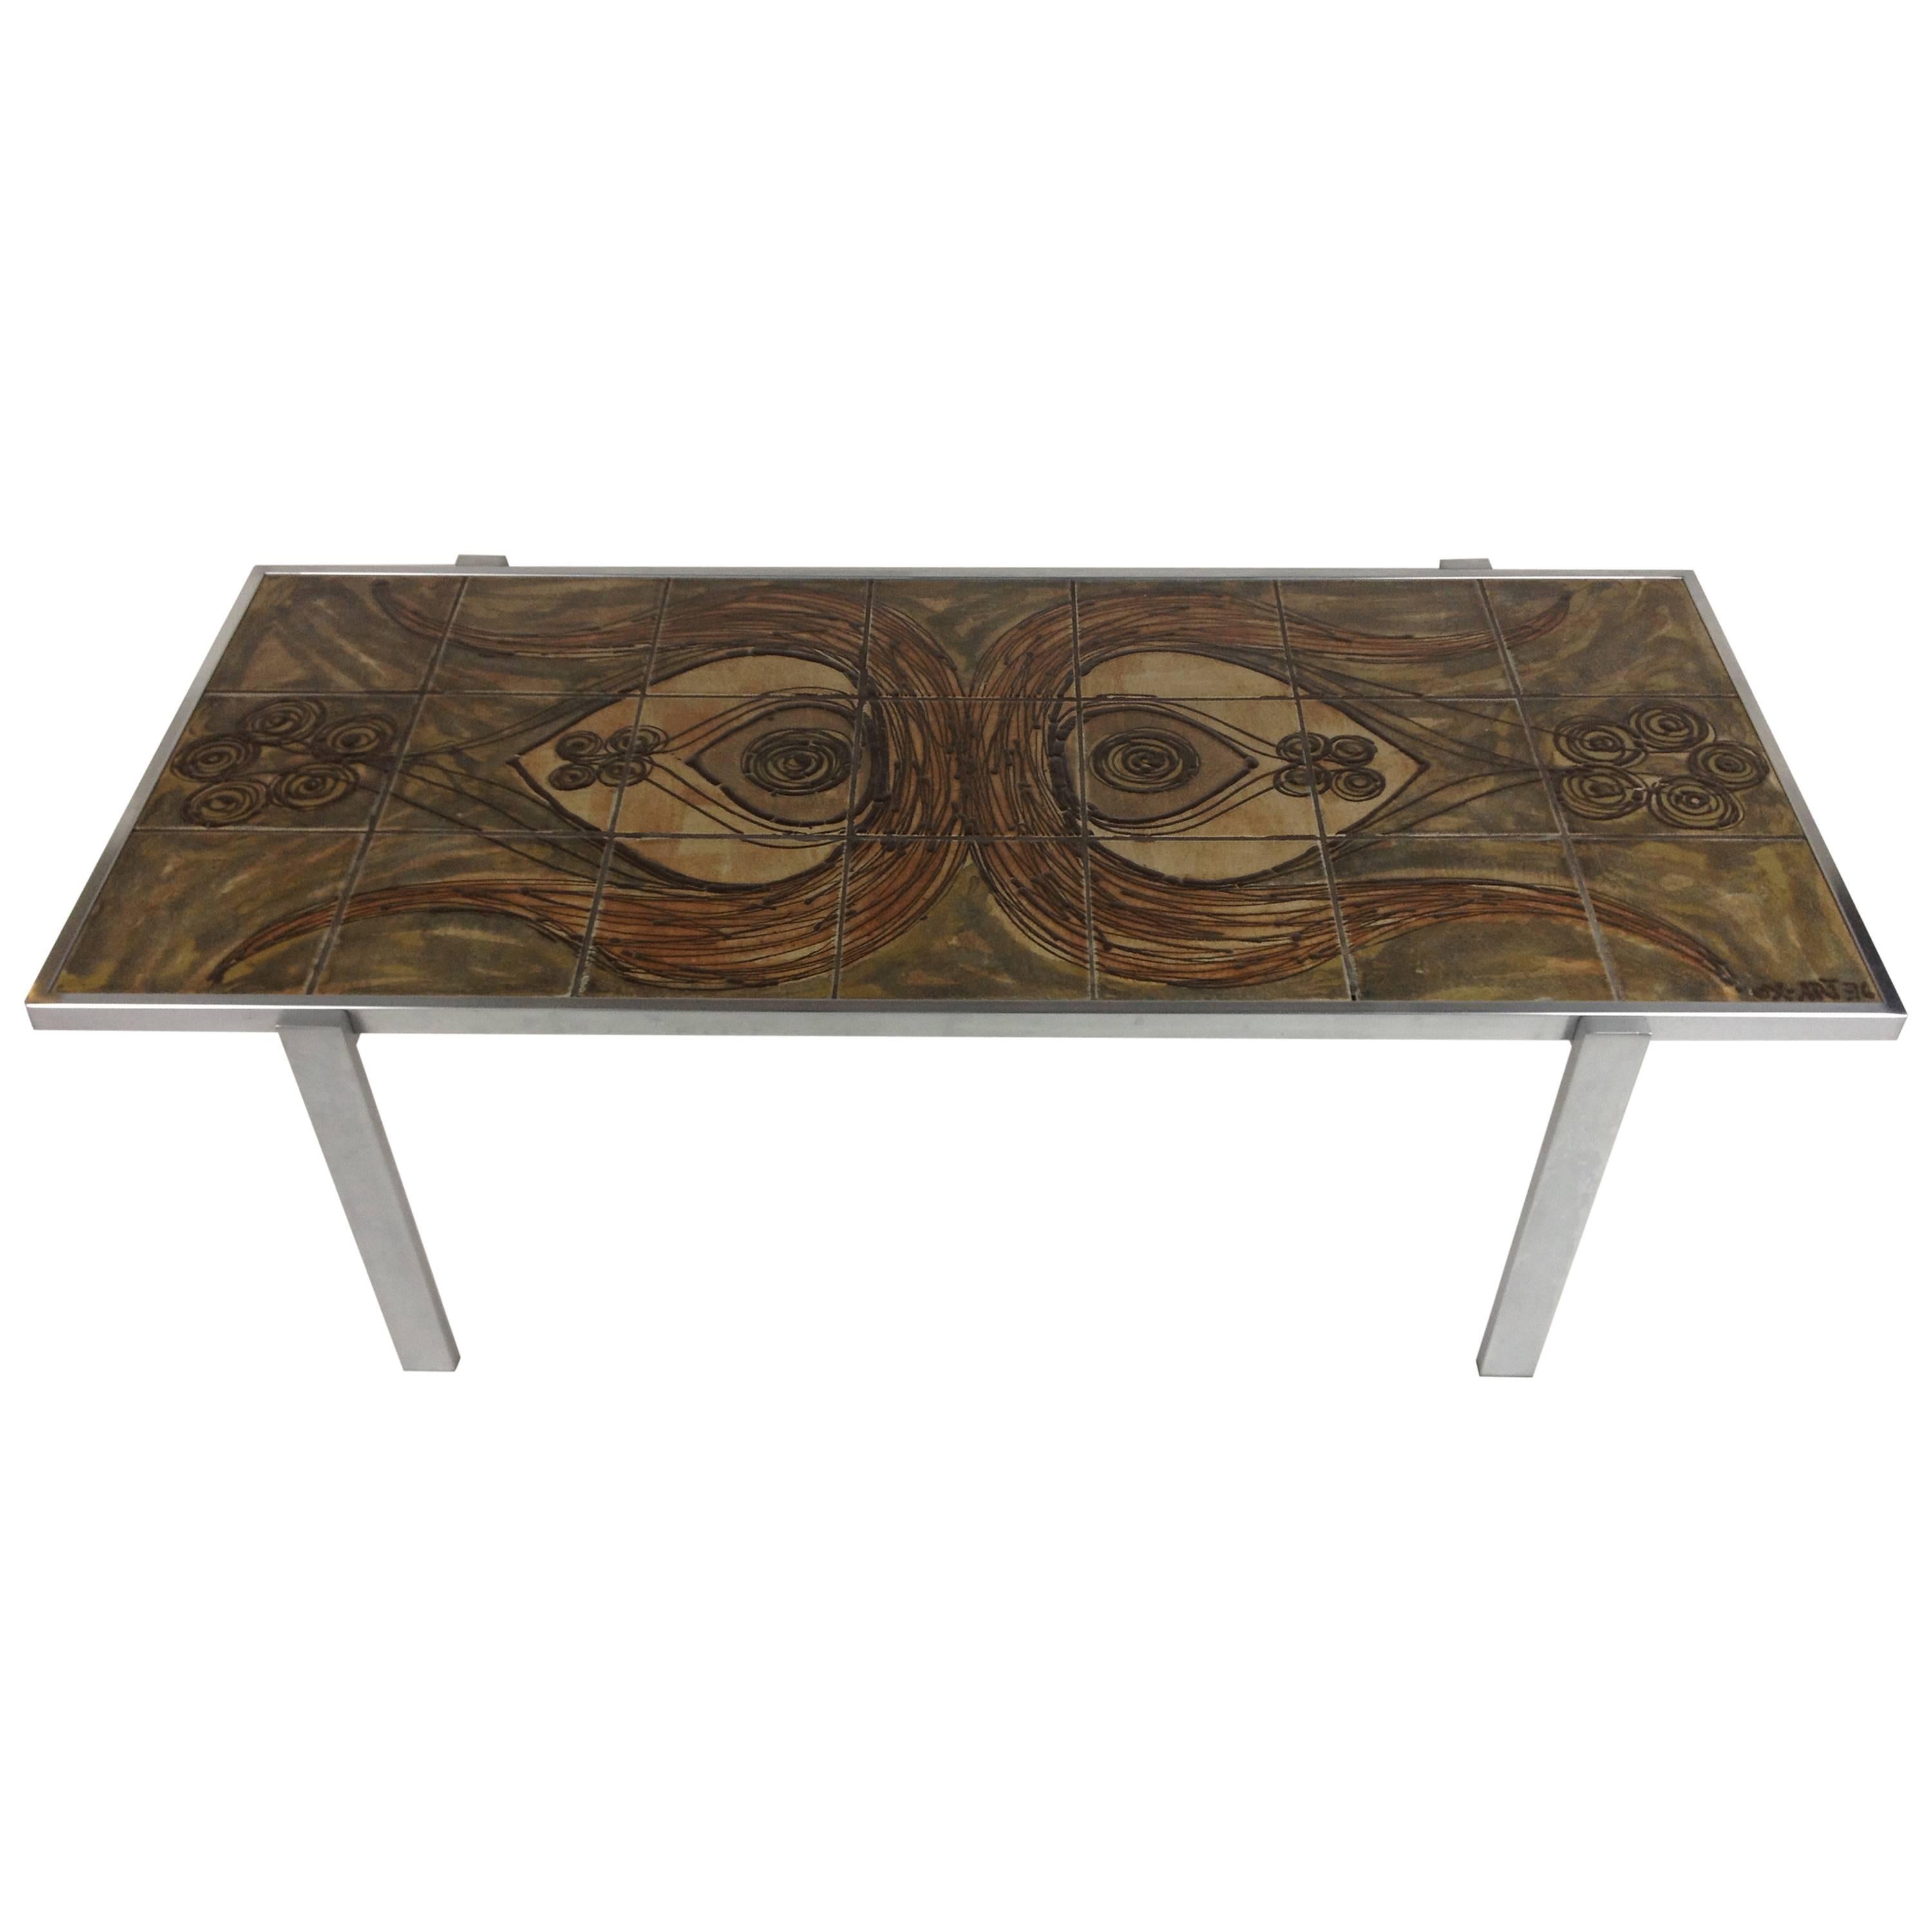 Incredible Rare Danish Modern Ox Art Tile & Metal Coffee Table, Dyrlund, Signed For Sale